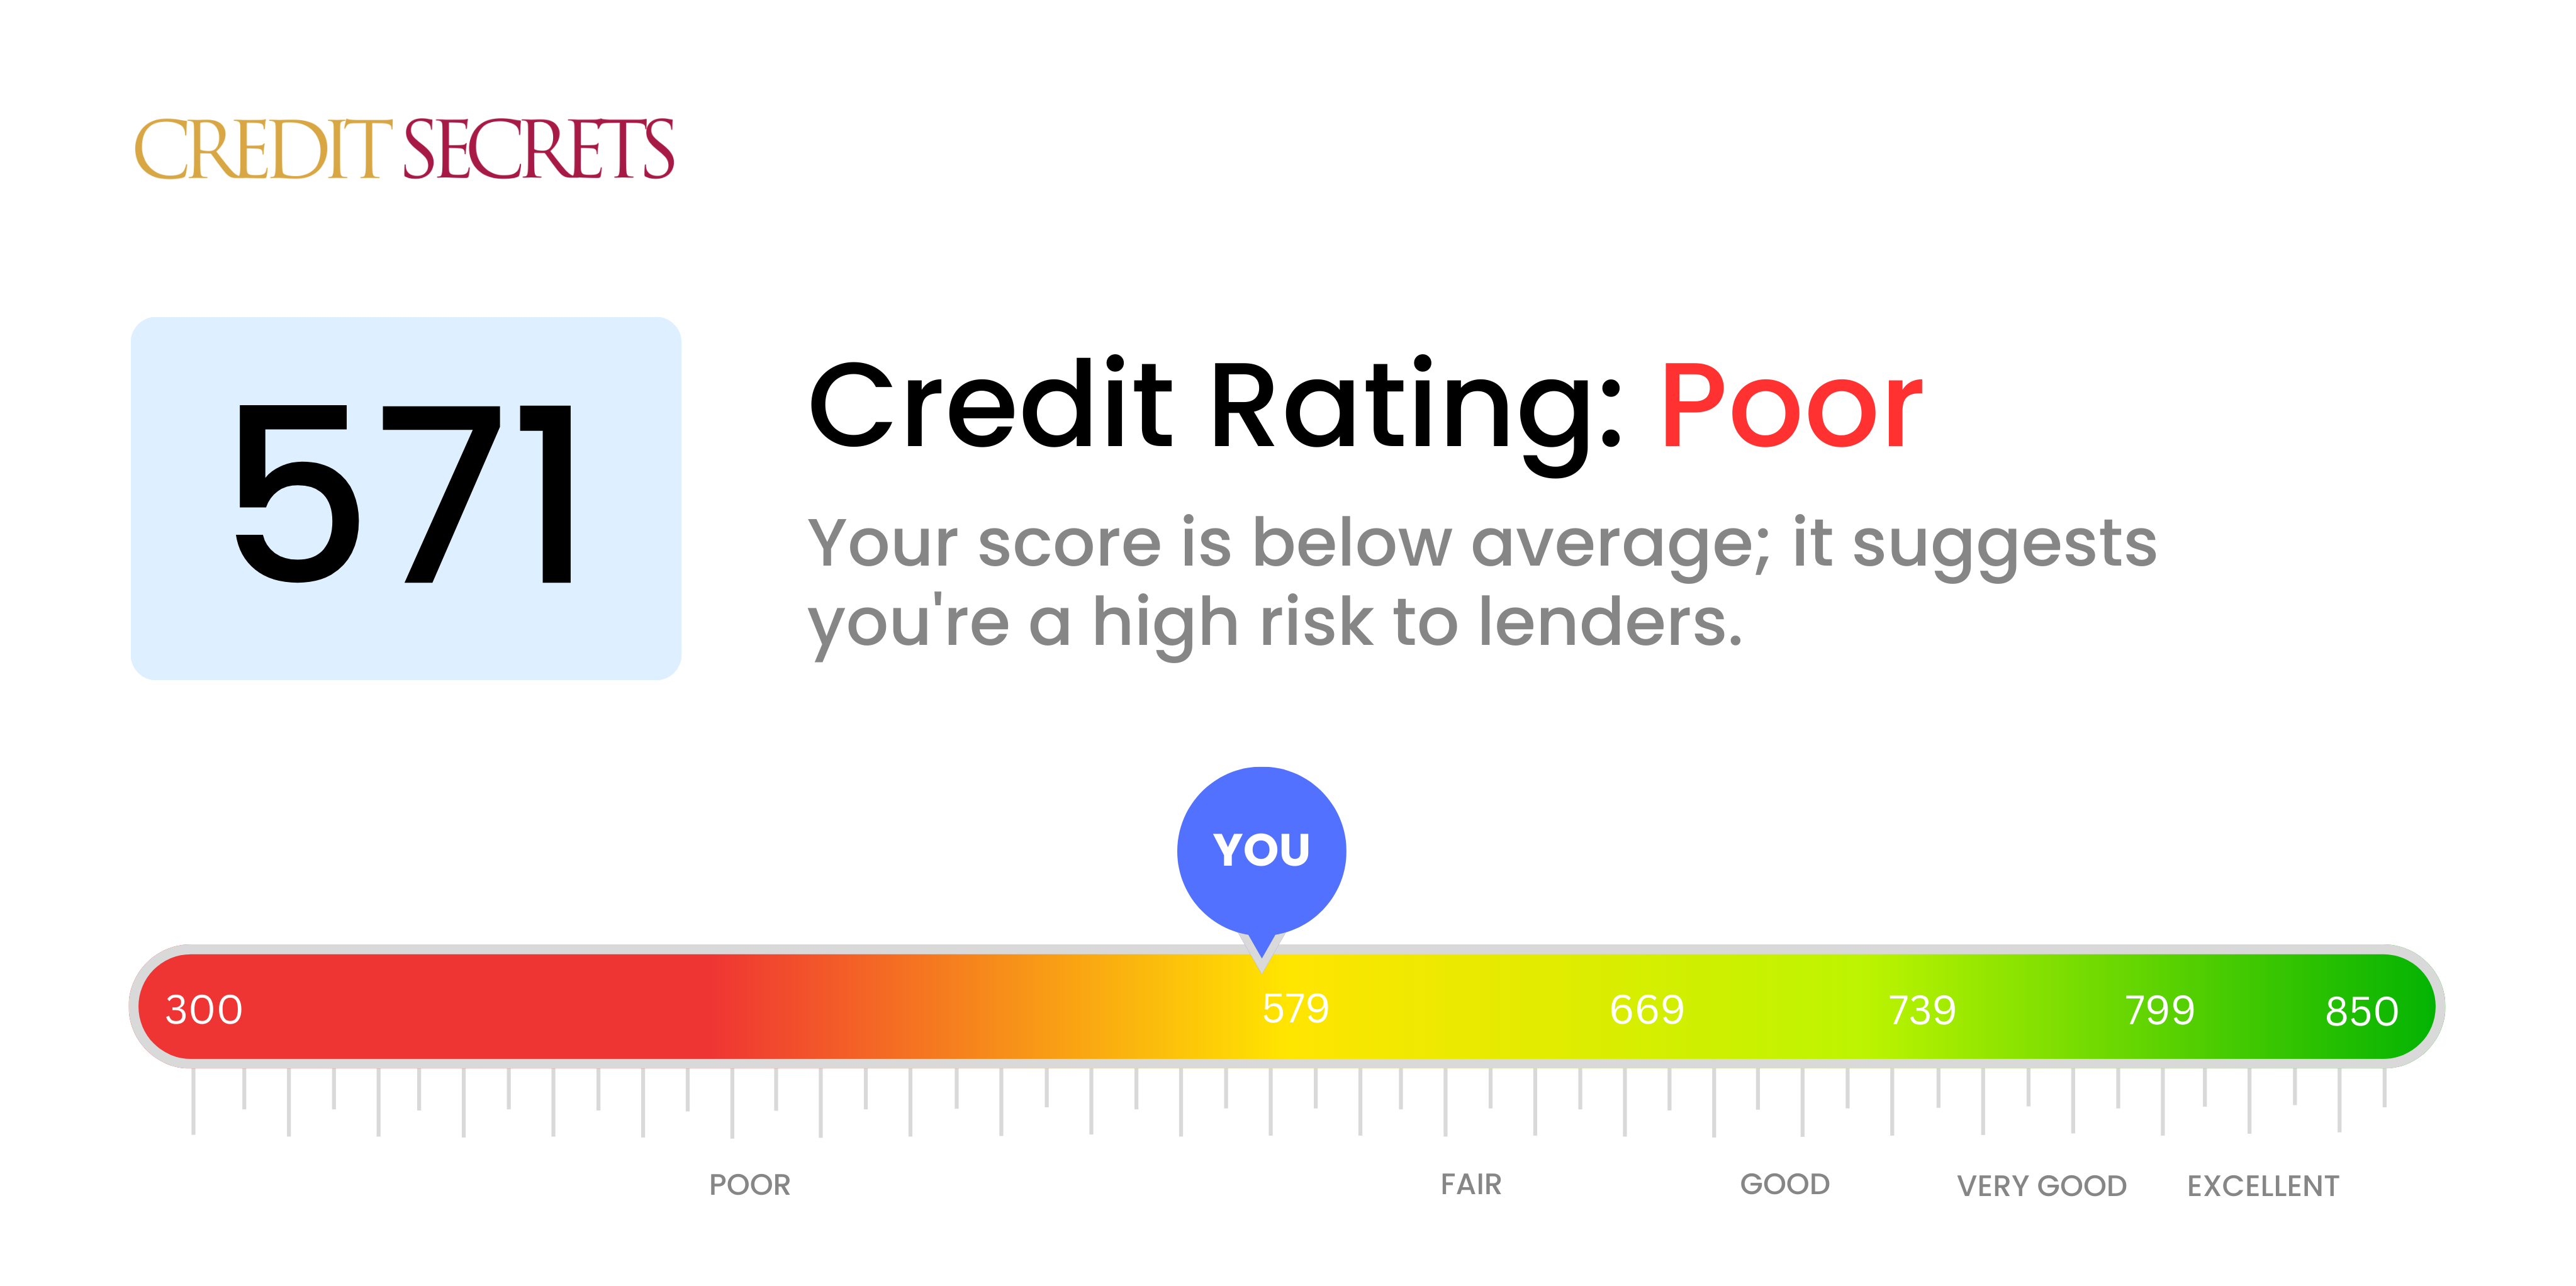 Is 571 a good credit score?